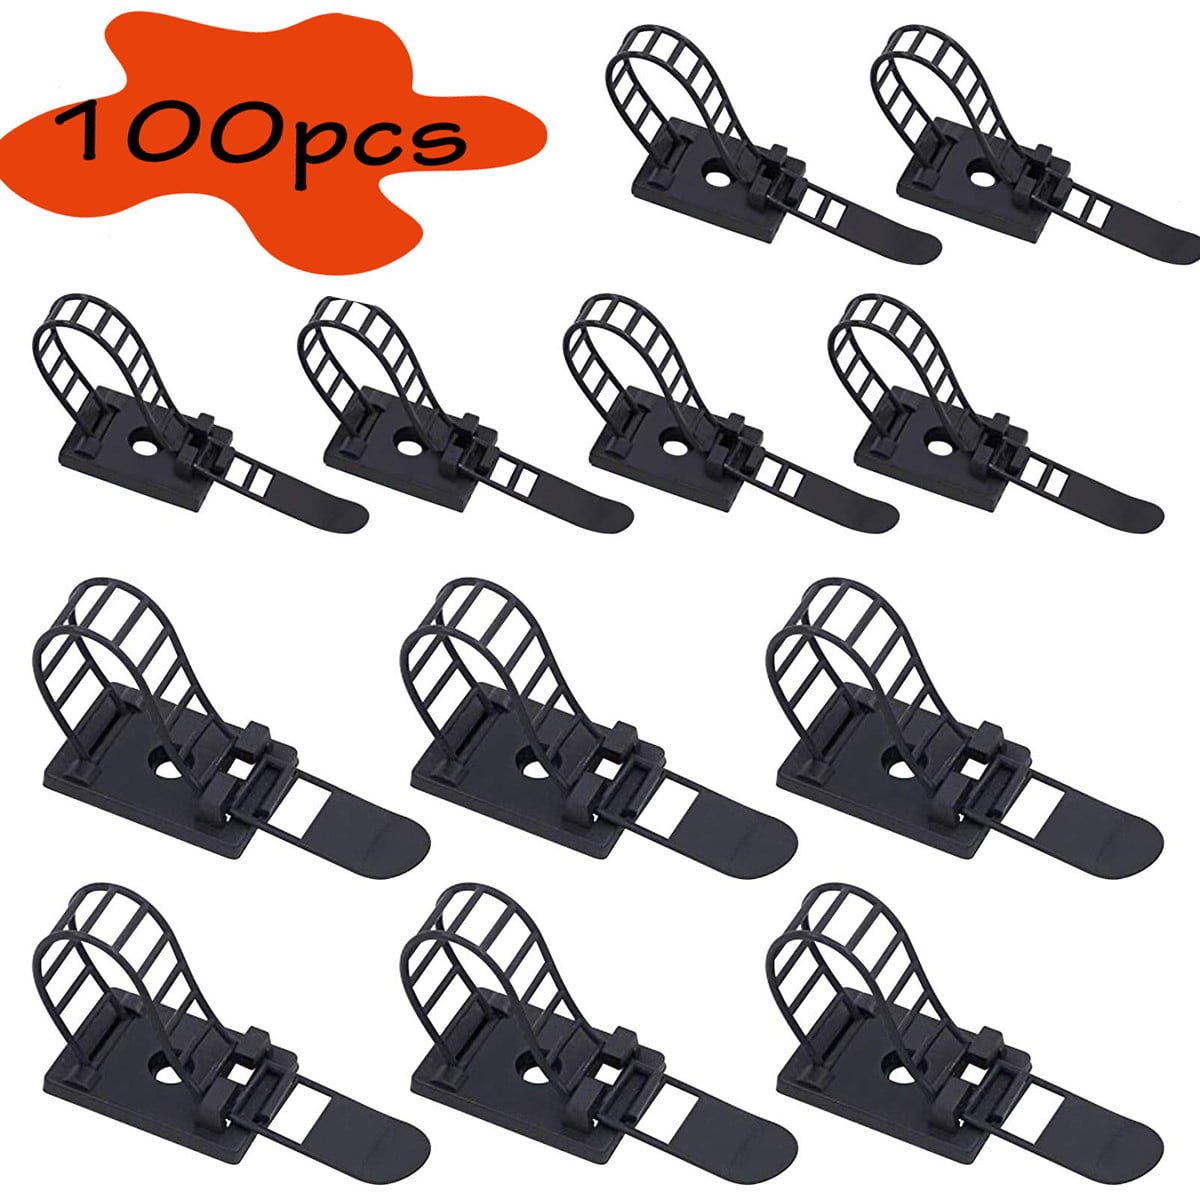 Details about   Mount Head Cable Zip Ties 10 Inch Screw Hole Nylon Wire Strap Black 50pcs 